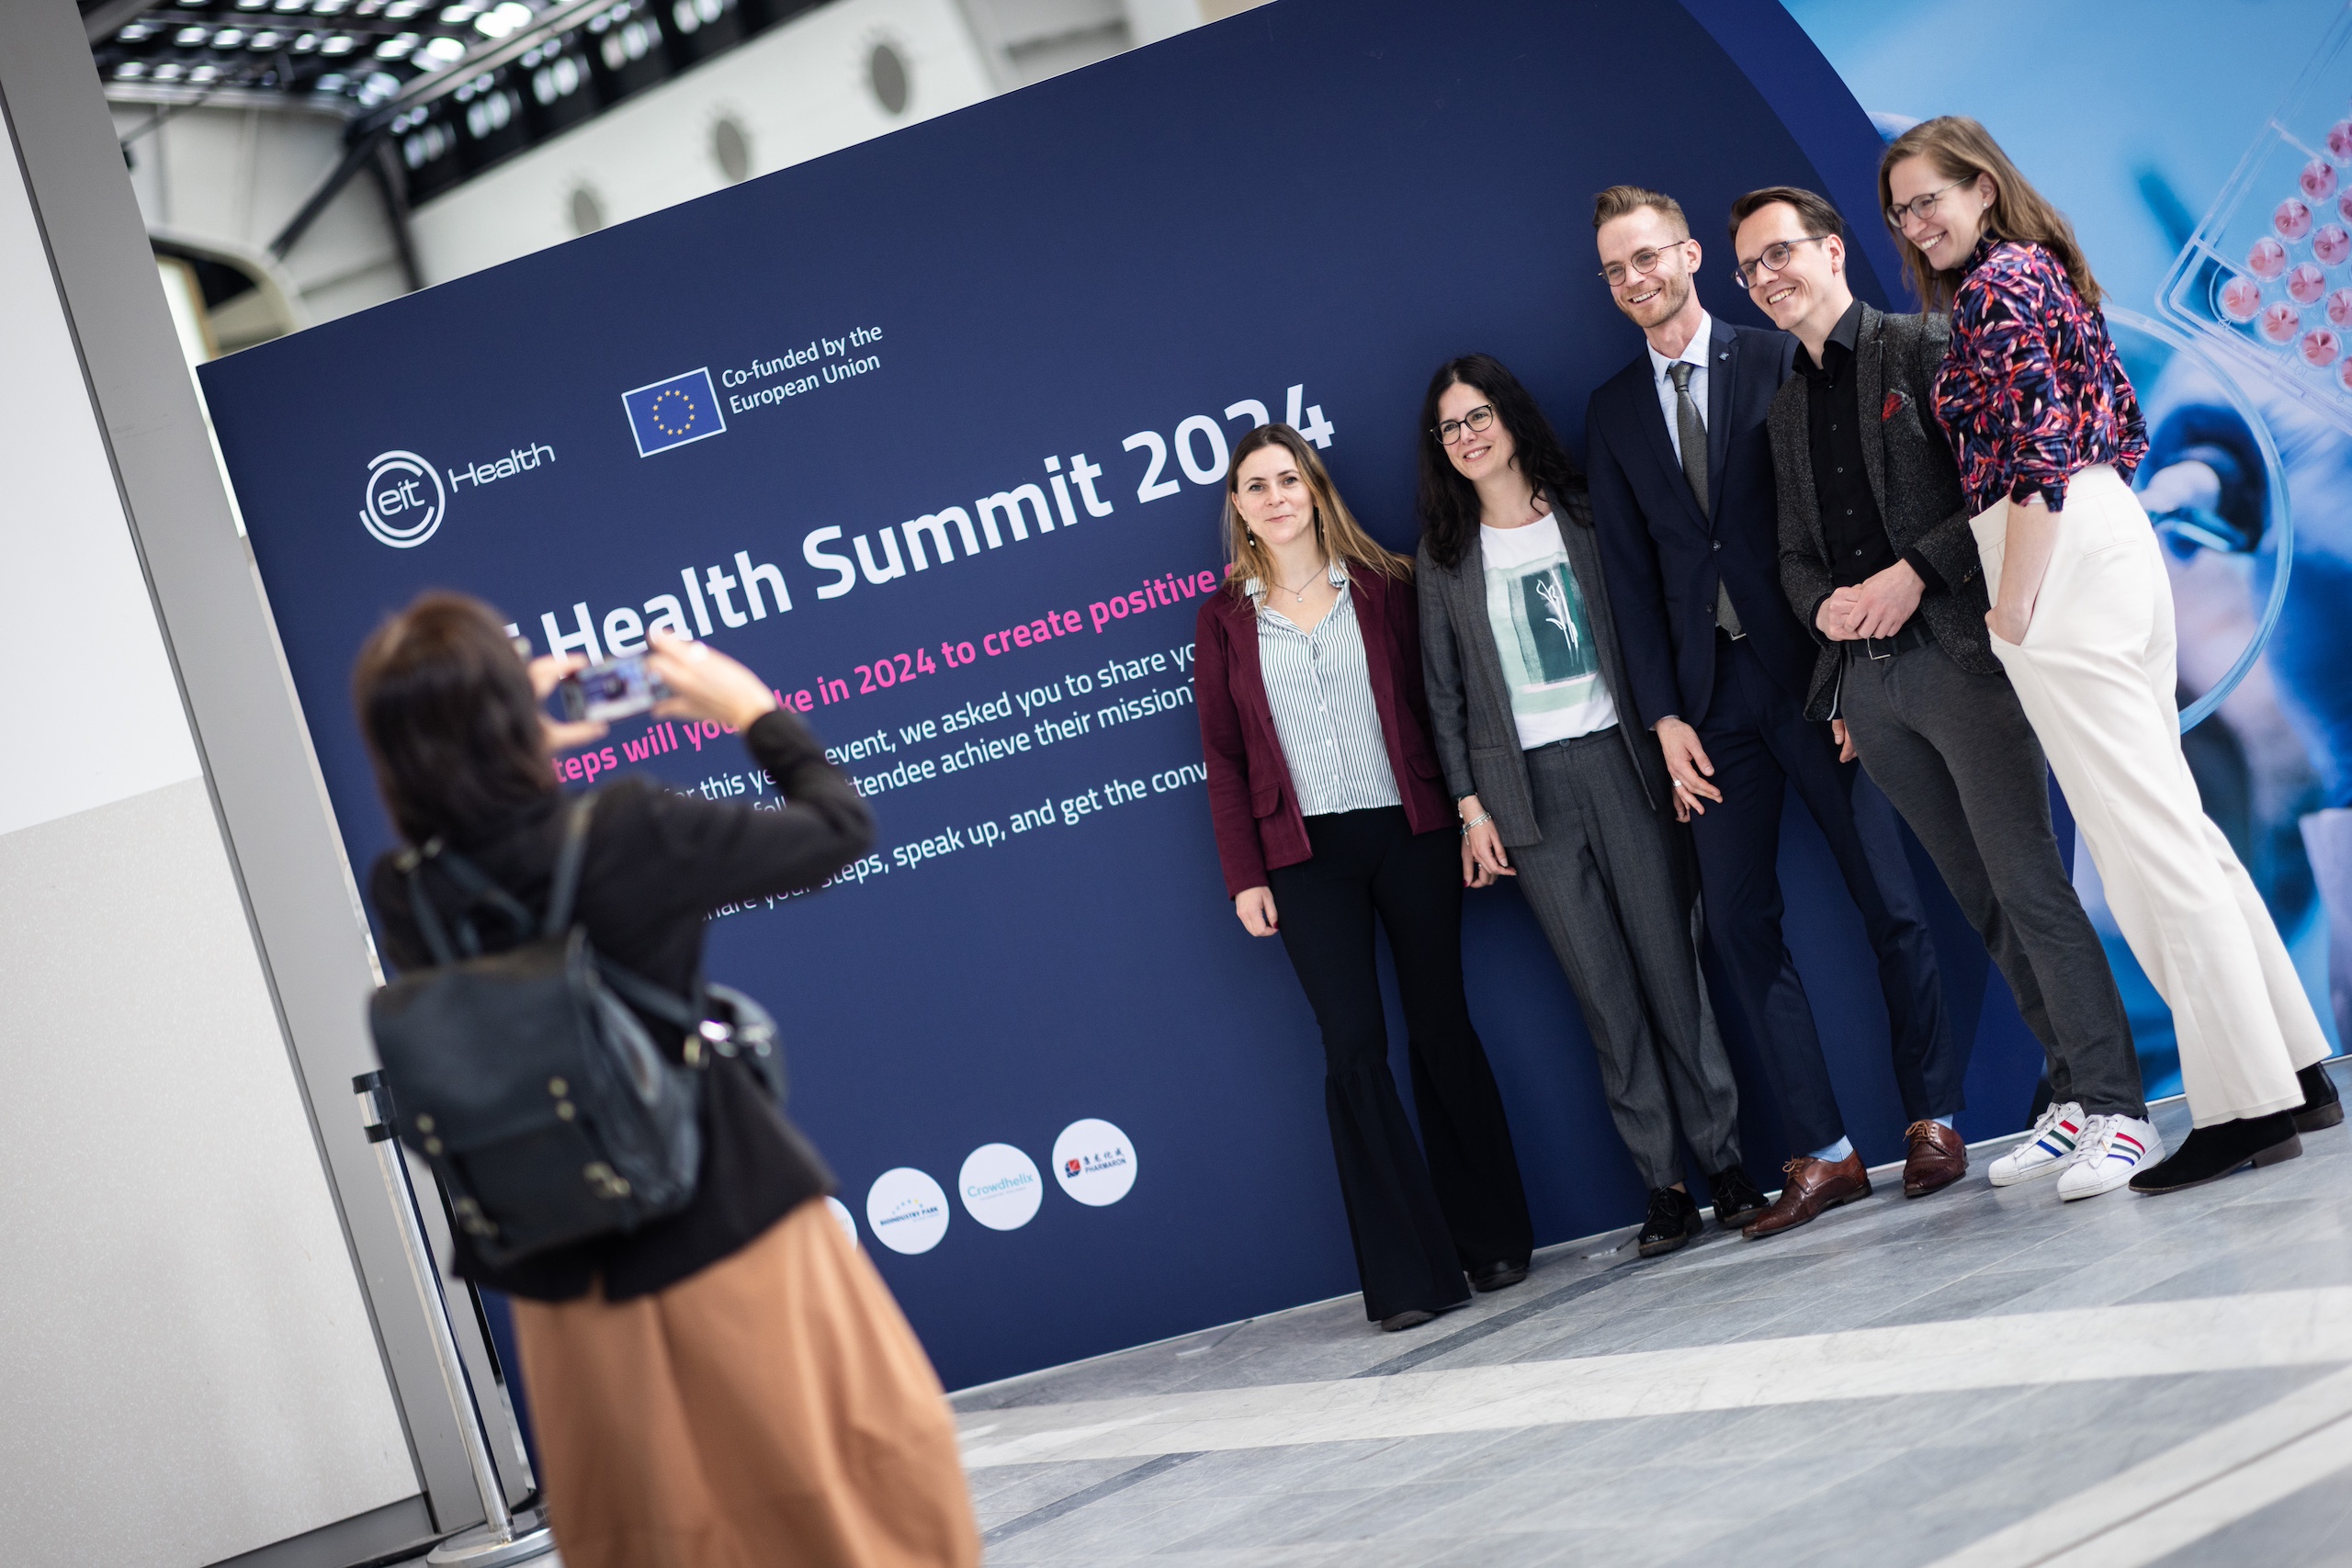 Our main takeaways from the EIT Health Summit 2024